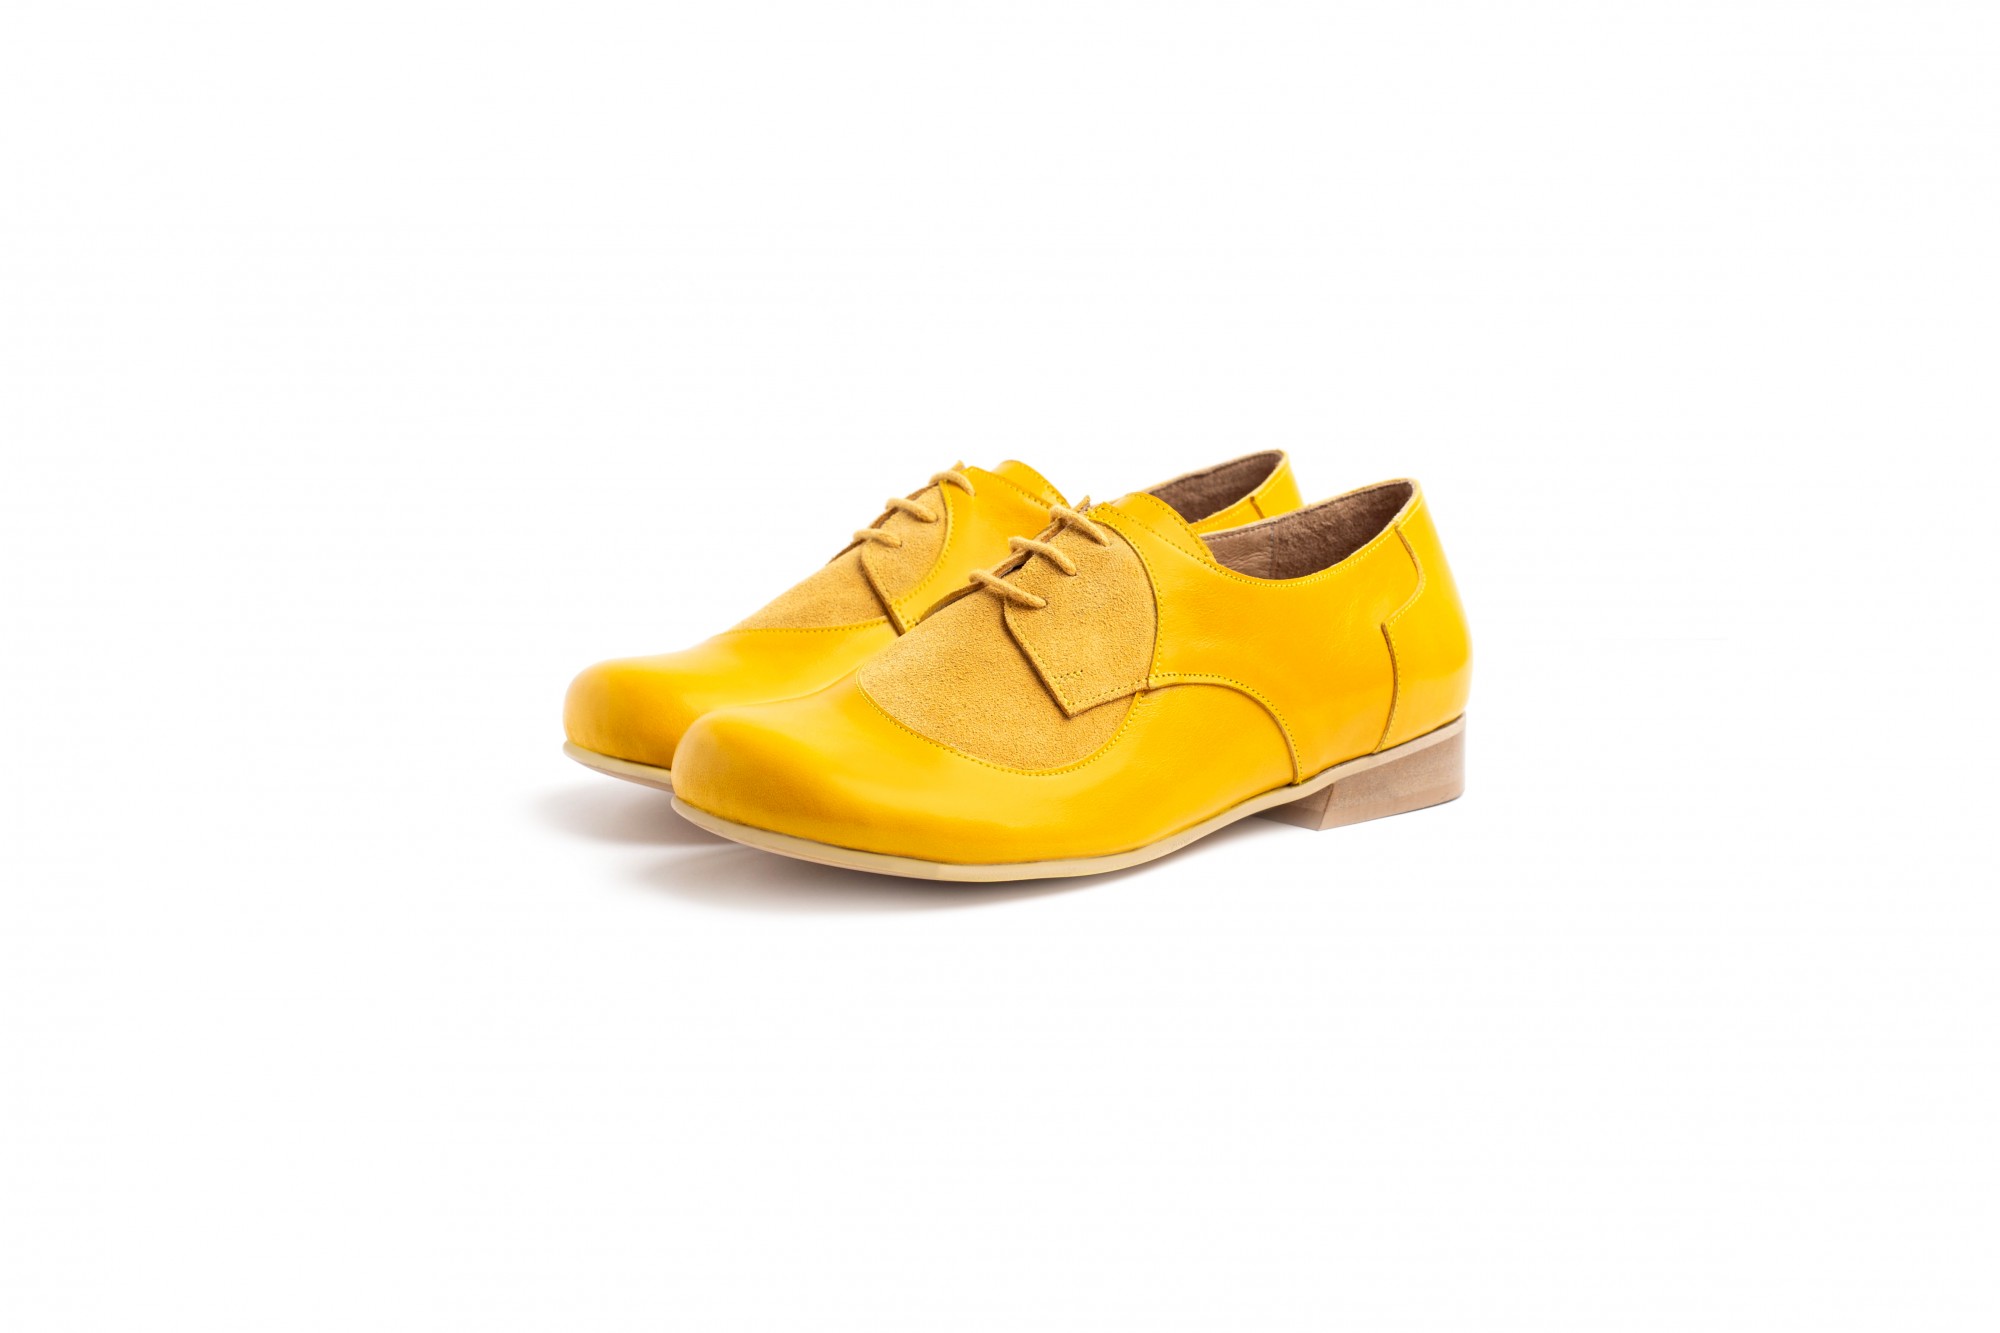 yellow oxford shoes